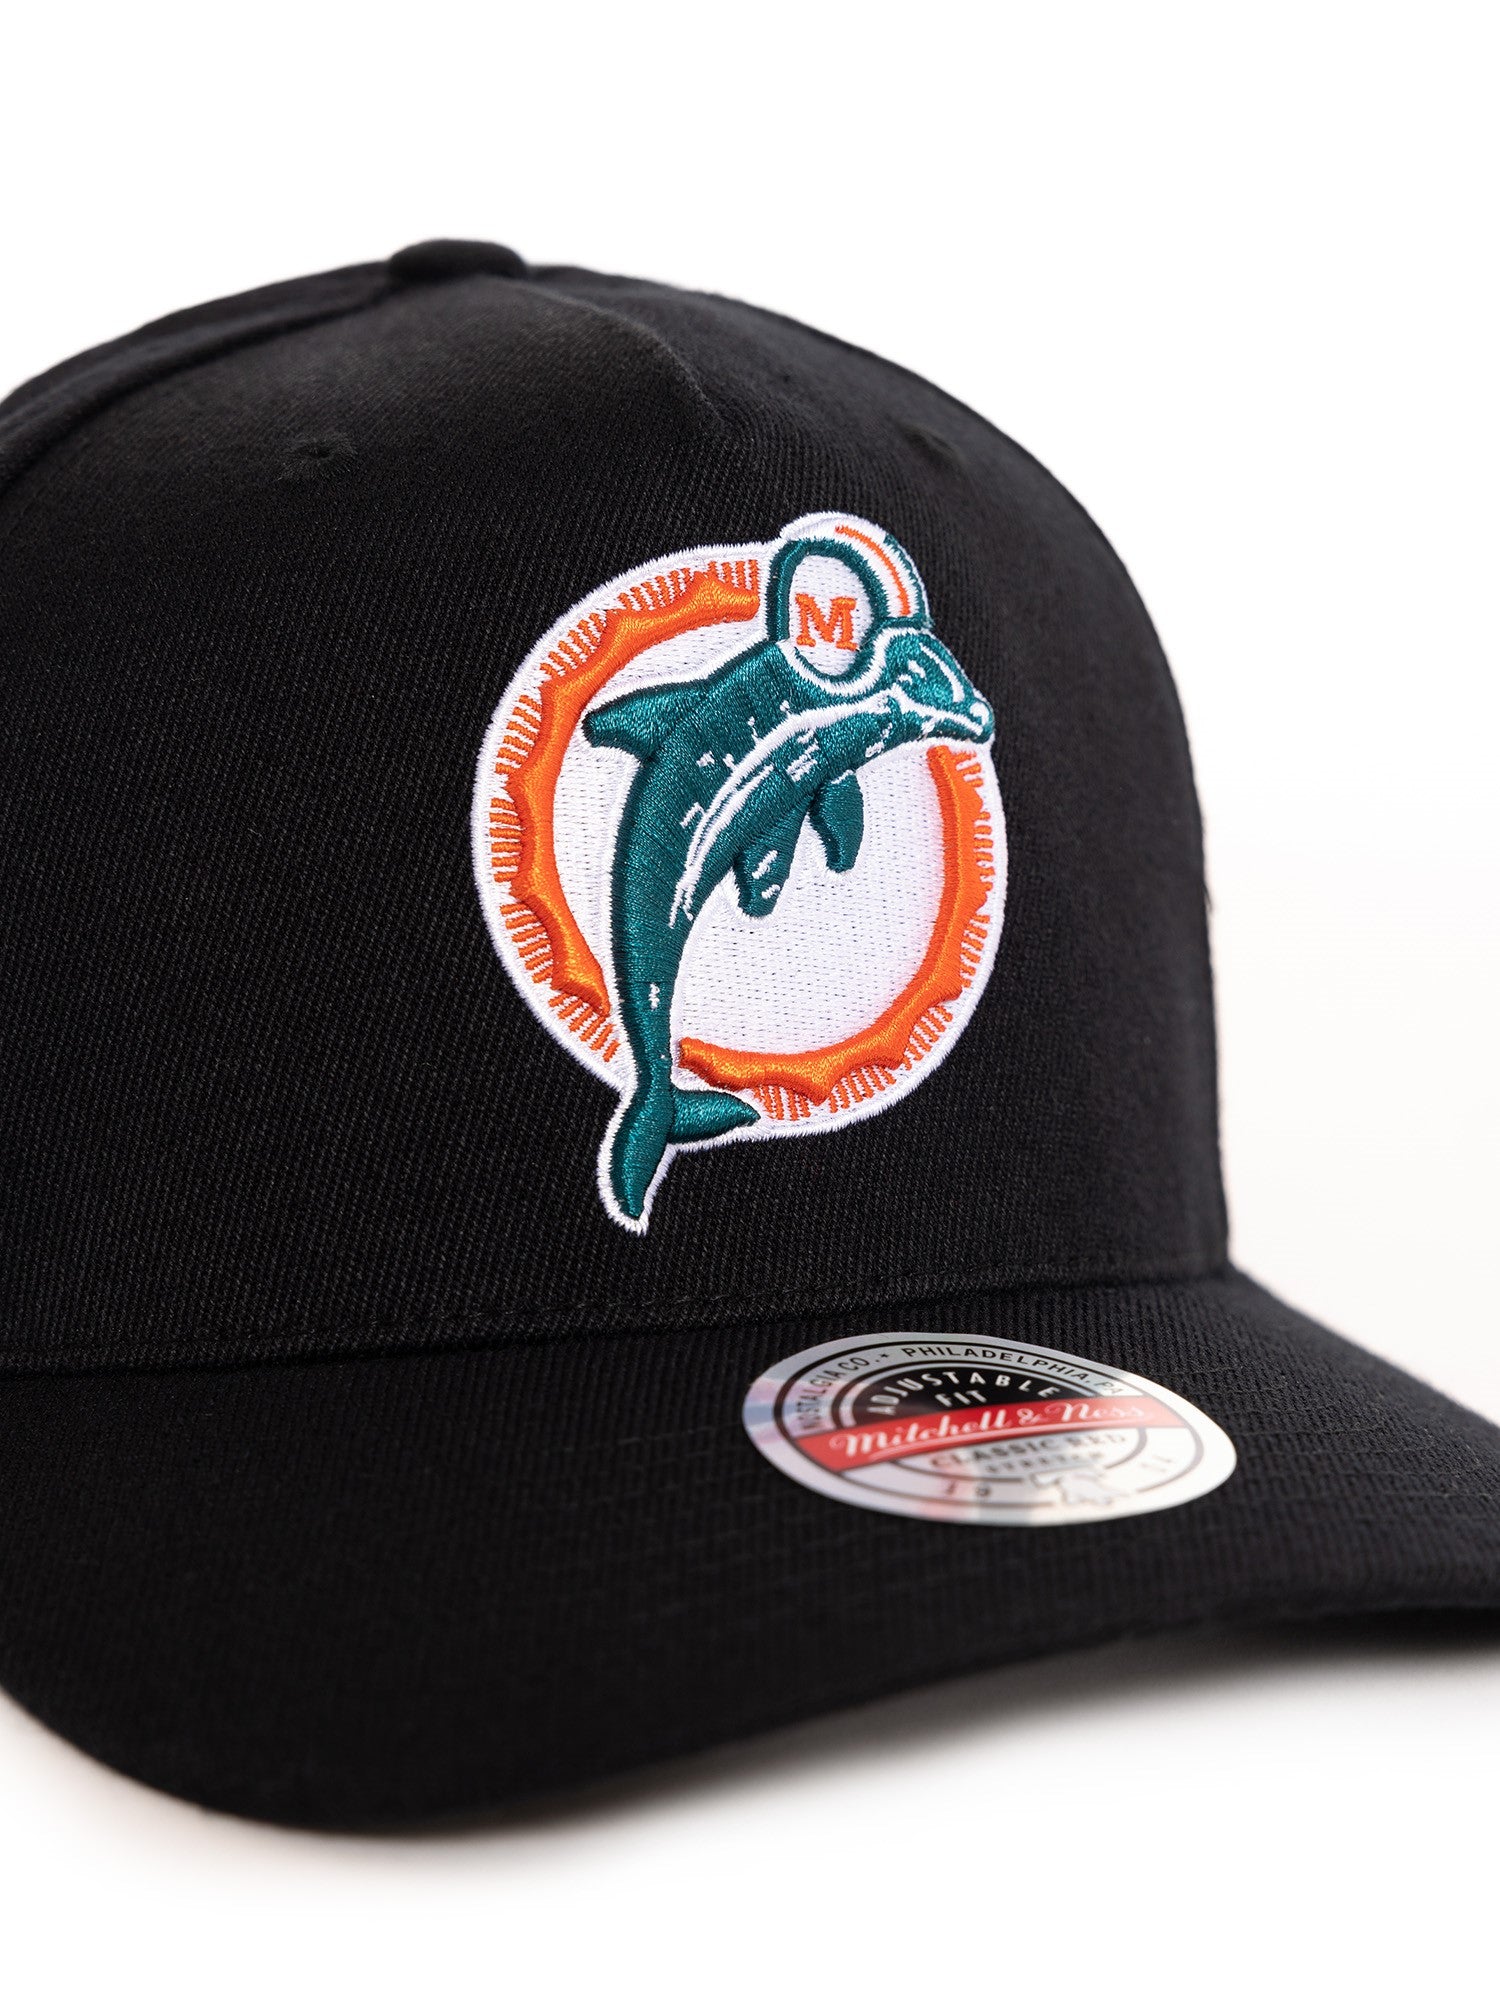 Miami Dolphins Hat - NFL Black Team Evergreen Wide Receiver Snapback - Mitchell & Ness